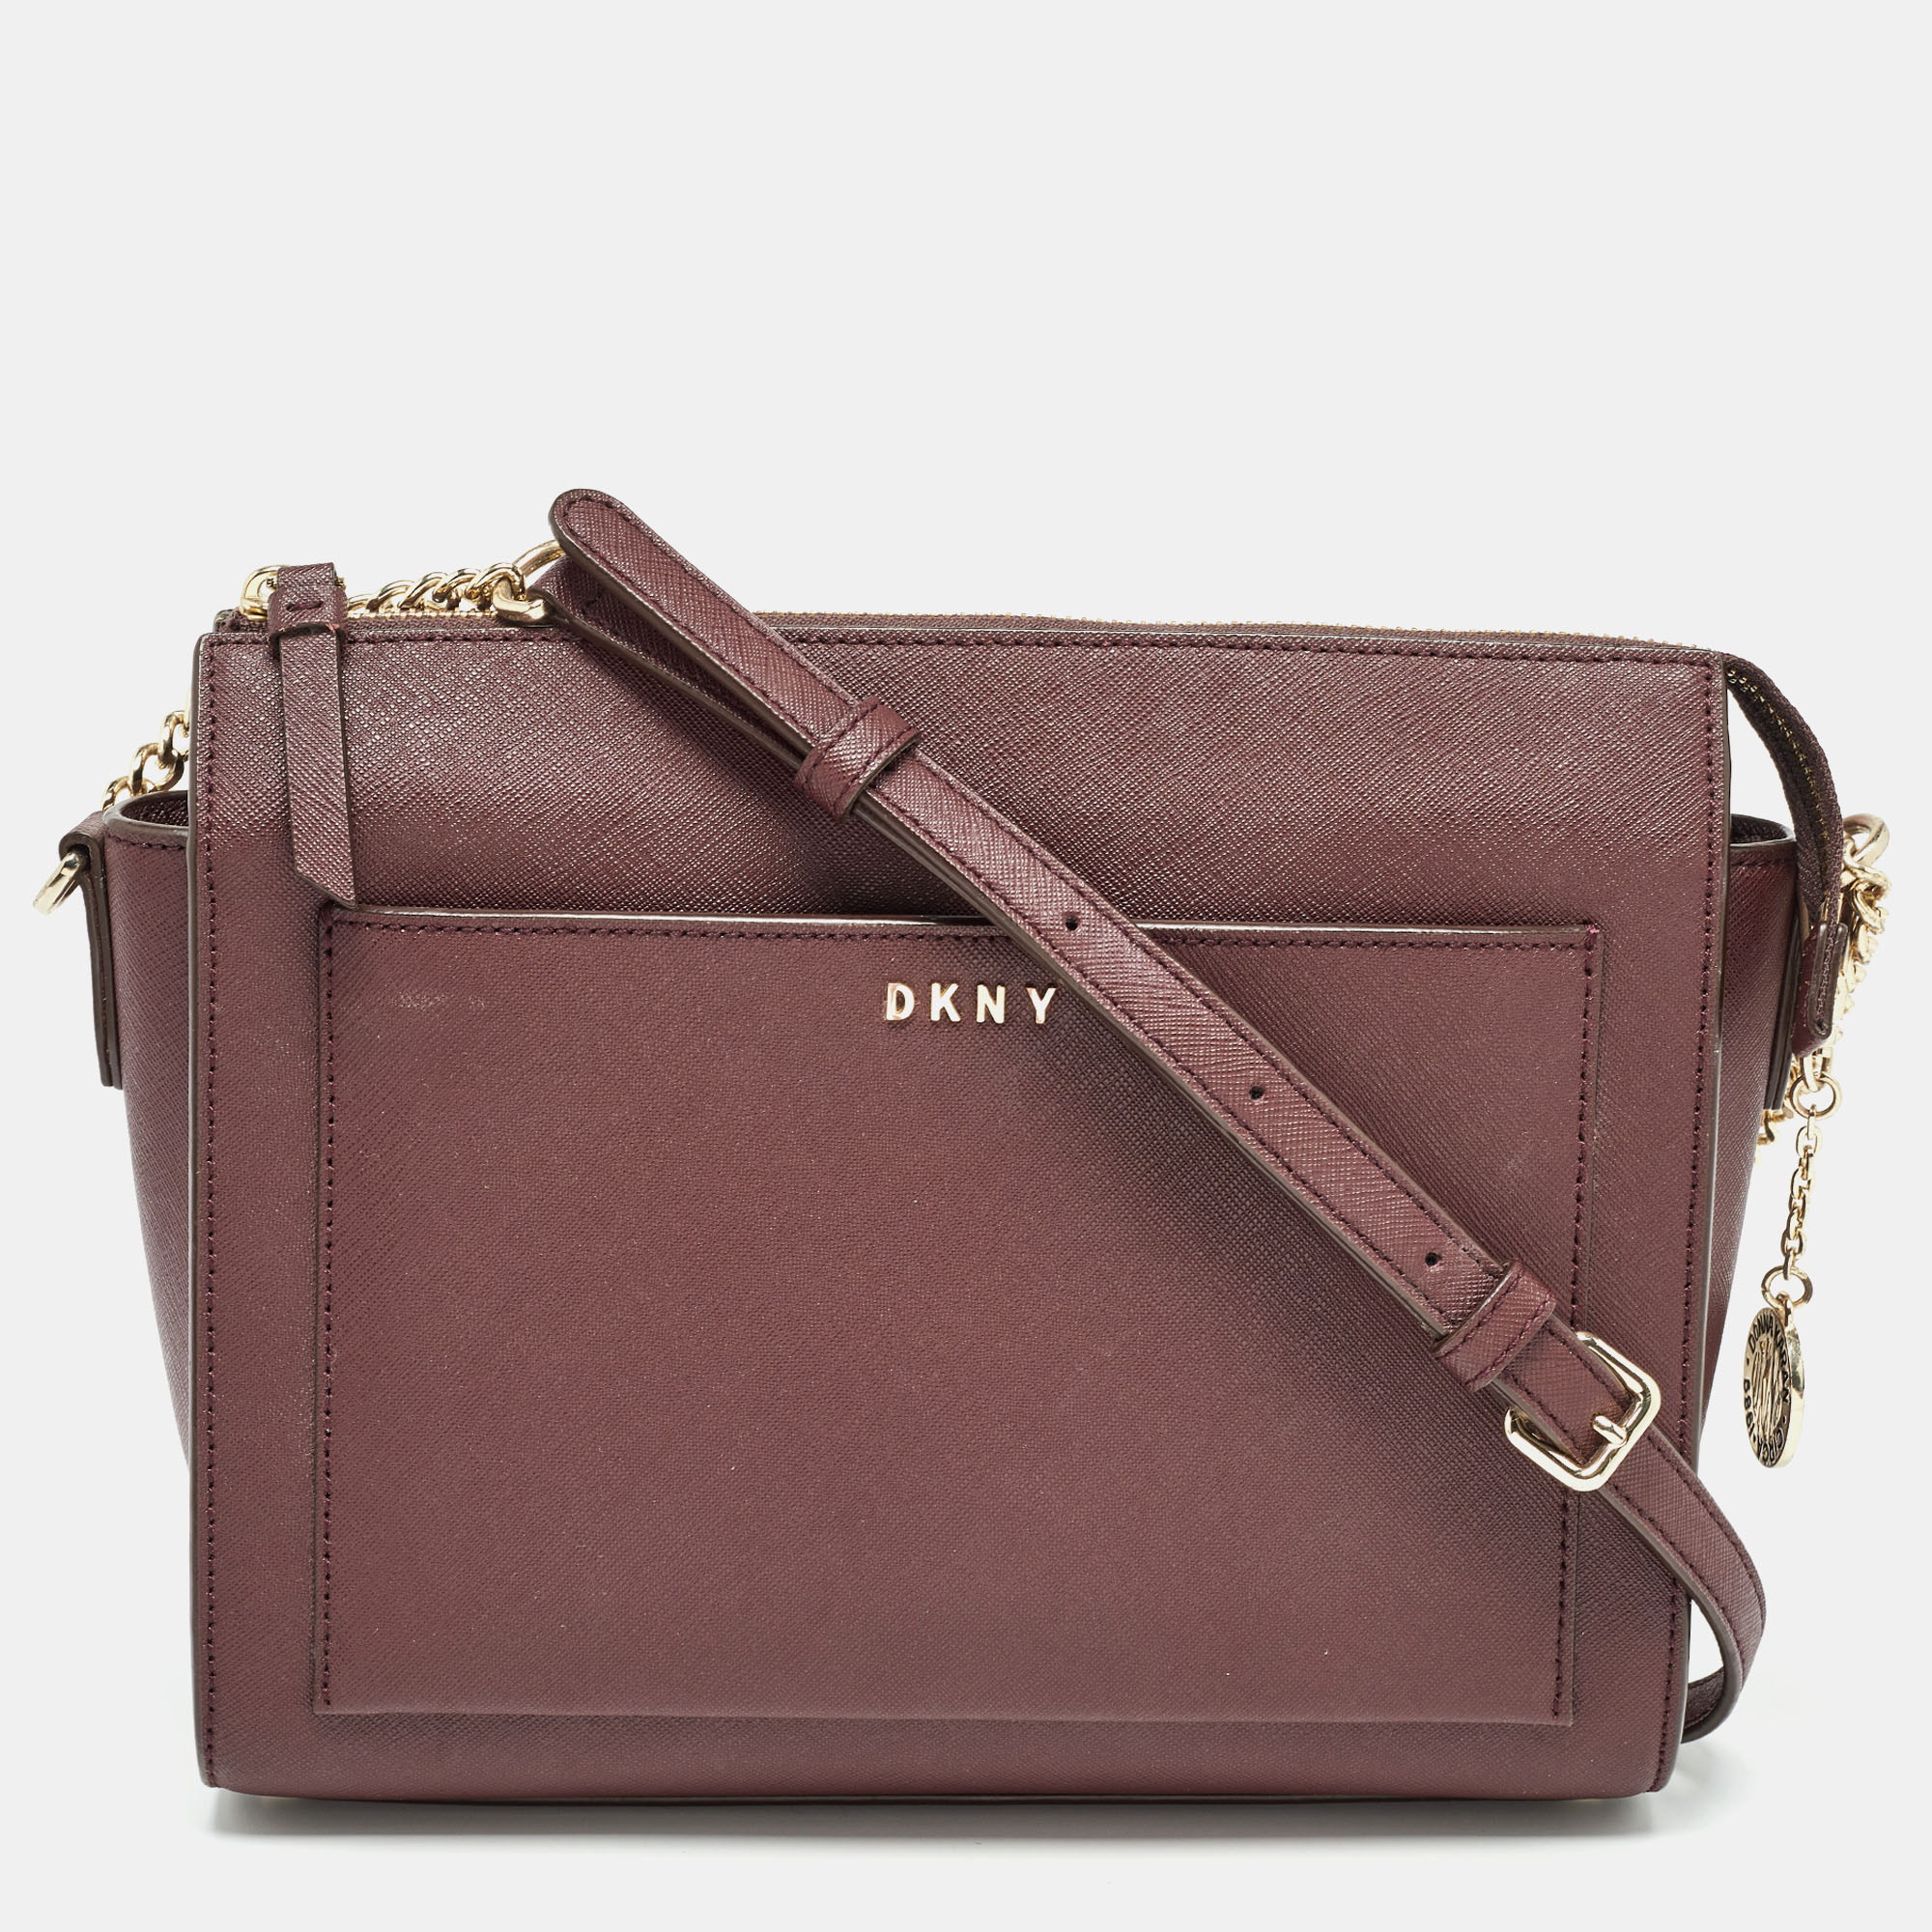 Structured sophisticated and stylish are some words that describe this crossbody bag Crafted from best quality material the creation is adorned with the labels signature appeal held by comfortable handles and equipped with a well spaced interior. Carry it to work or shopping sprees youll look chic